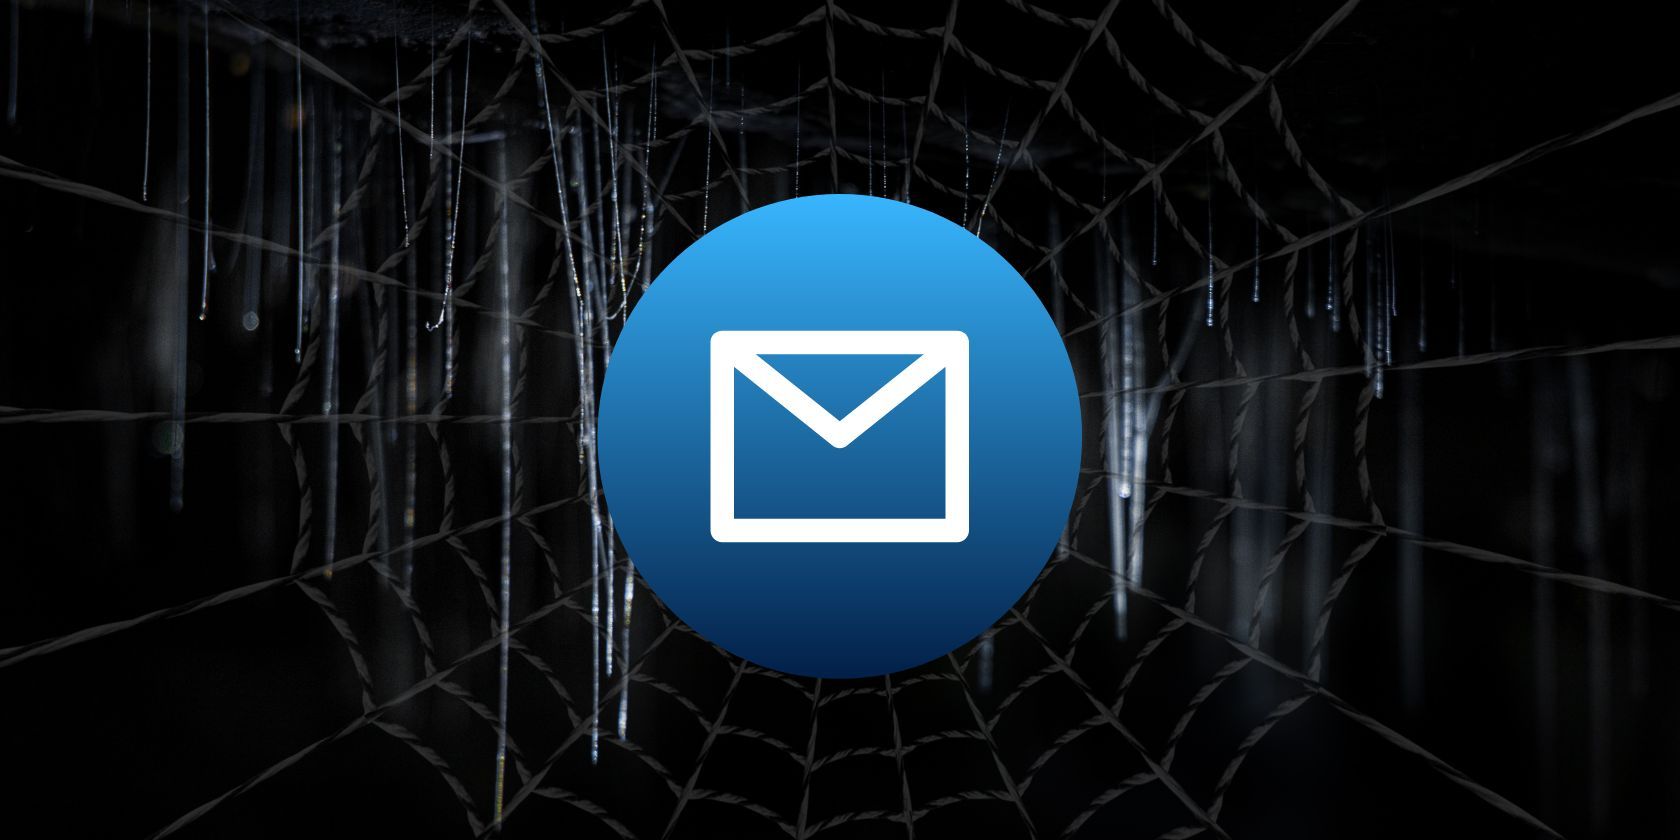 Has Your Email Address Leaked to the Dark Web? How to Check and What to Do